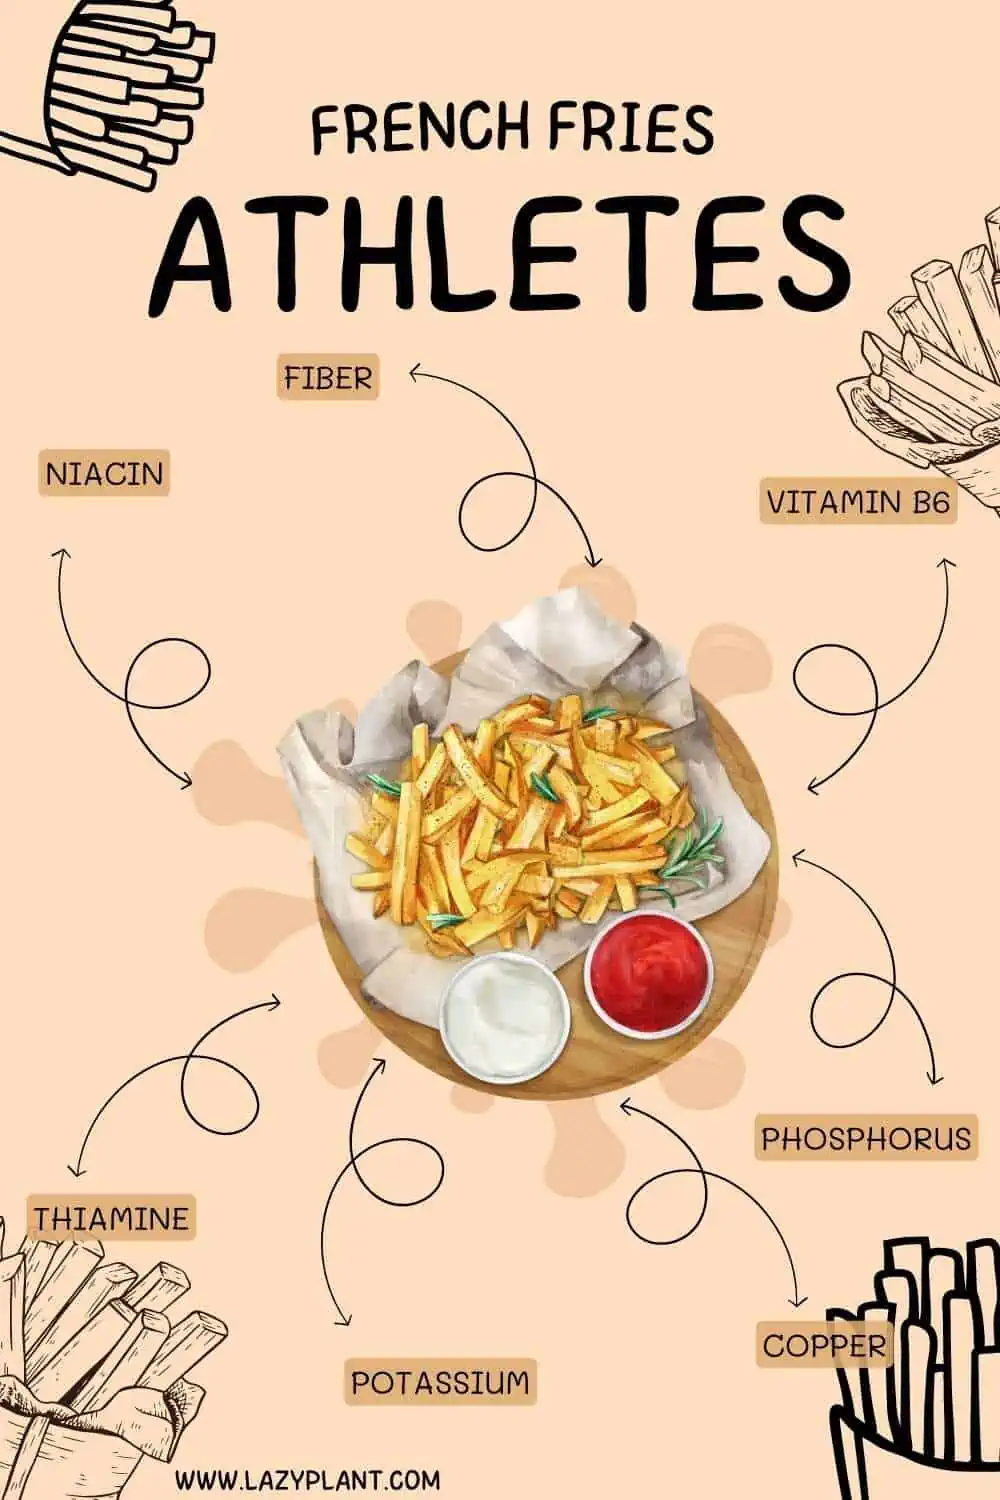 Benefits of eating French fries before & after exercise. Nutritional value.